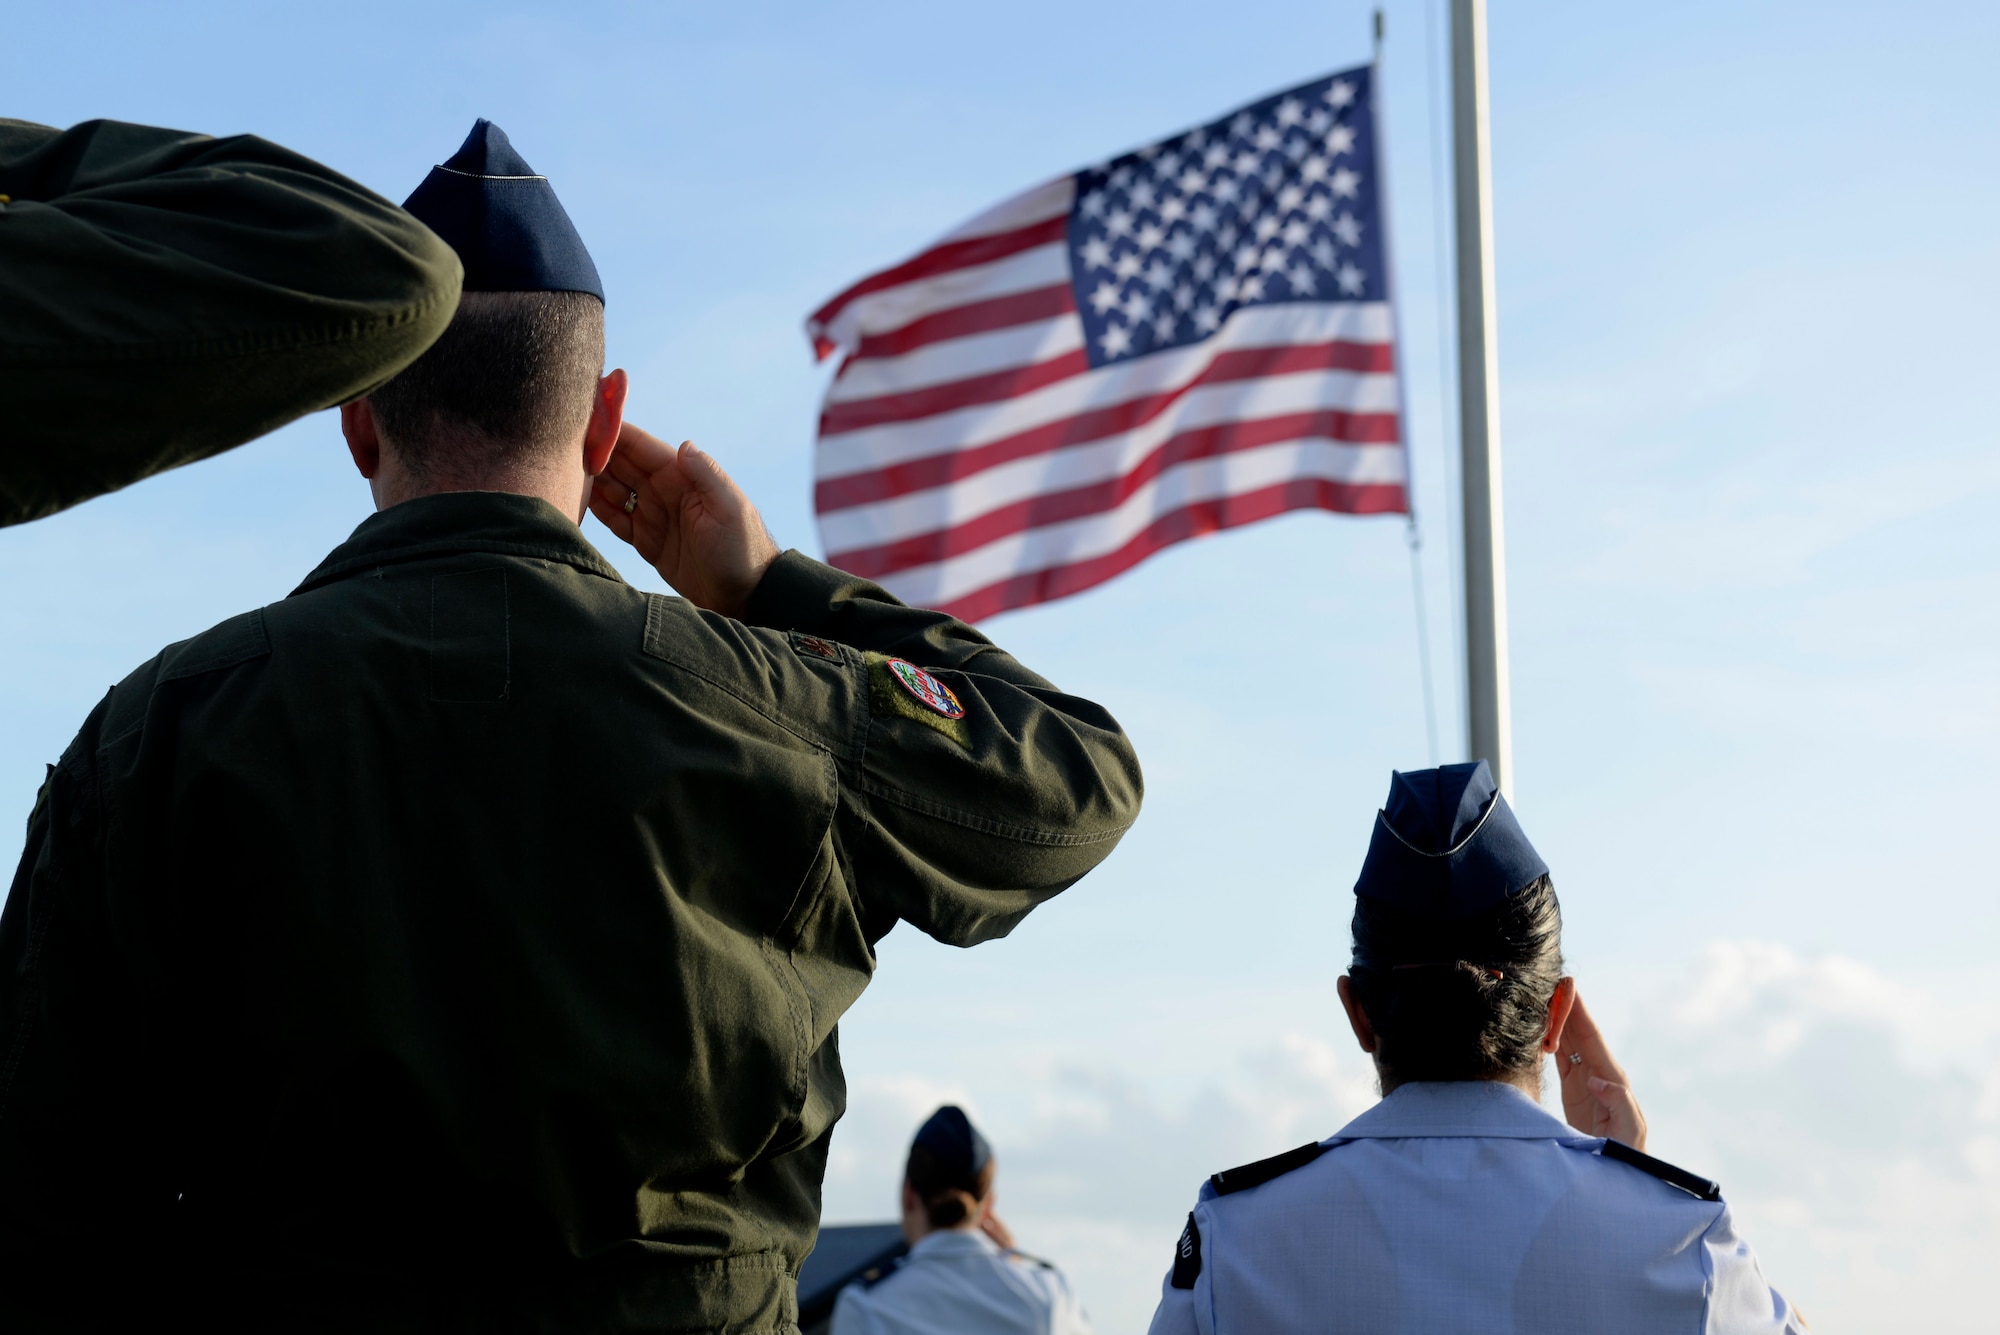 Attendees of the RAIDR 21 memorial ceremony salute during the National Anthem July 21, 2017, in Adelup, Guam. The monument honors the six B-52 Stratofortress crew members who lost their lives during a training mission July 21, 2008. The six aviators, from the 20th Expeditionary Bomb Squadron, were slated to participate in a flyover for Guam's Liberation Day Parade. (U.S. Air Force photo by Airman 1st Class Gerald R. Willis)